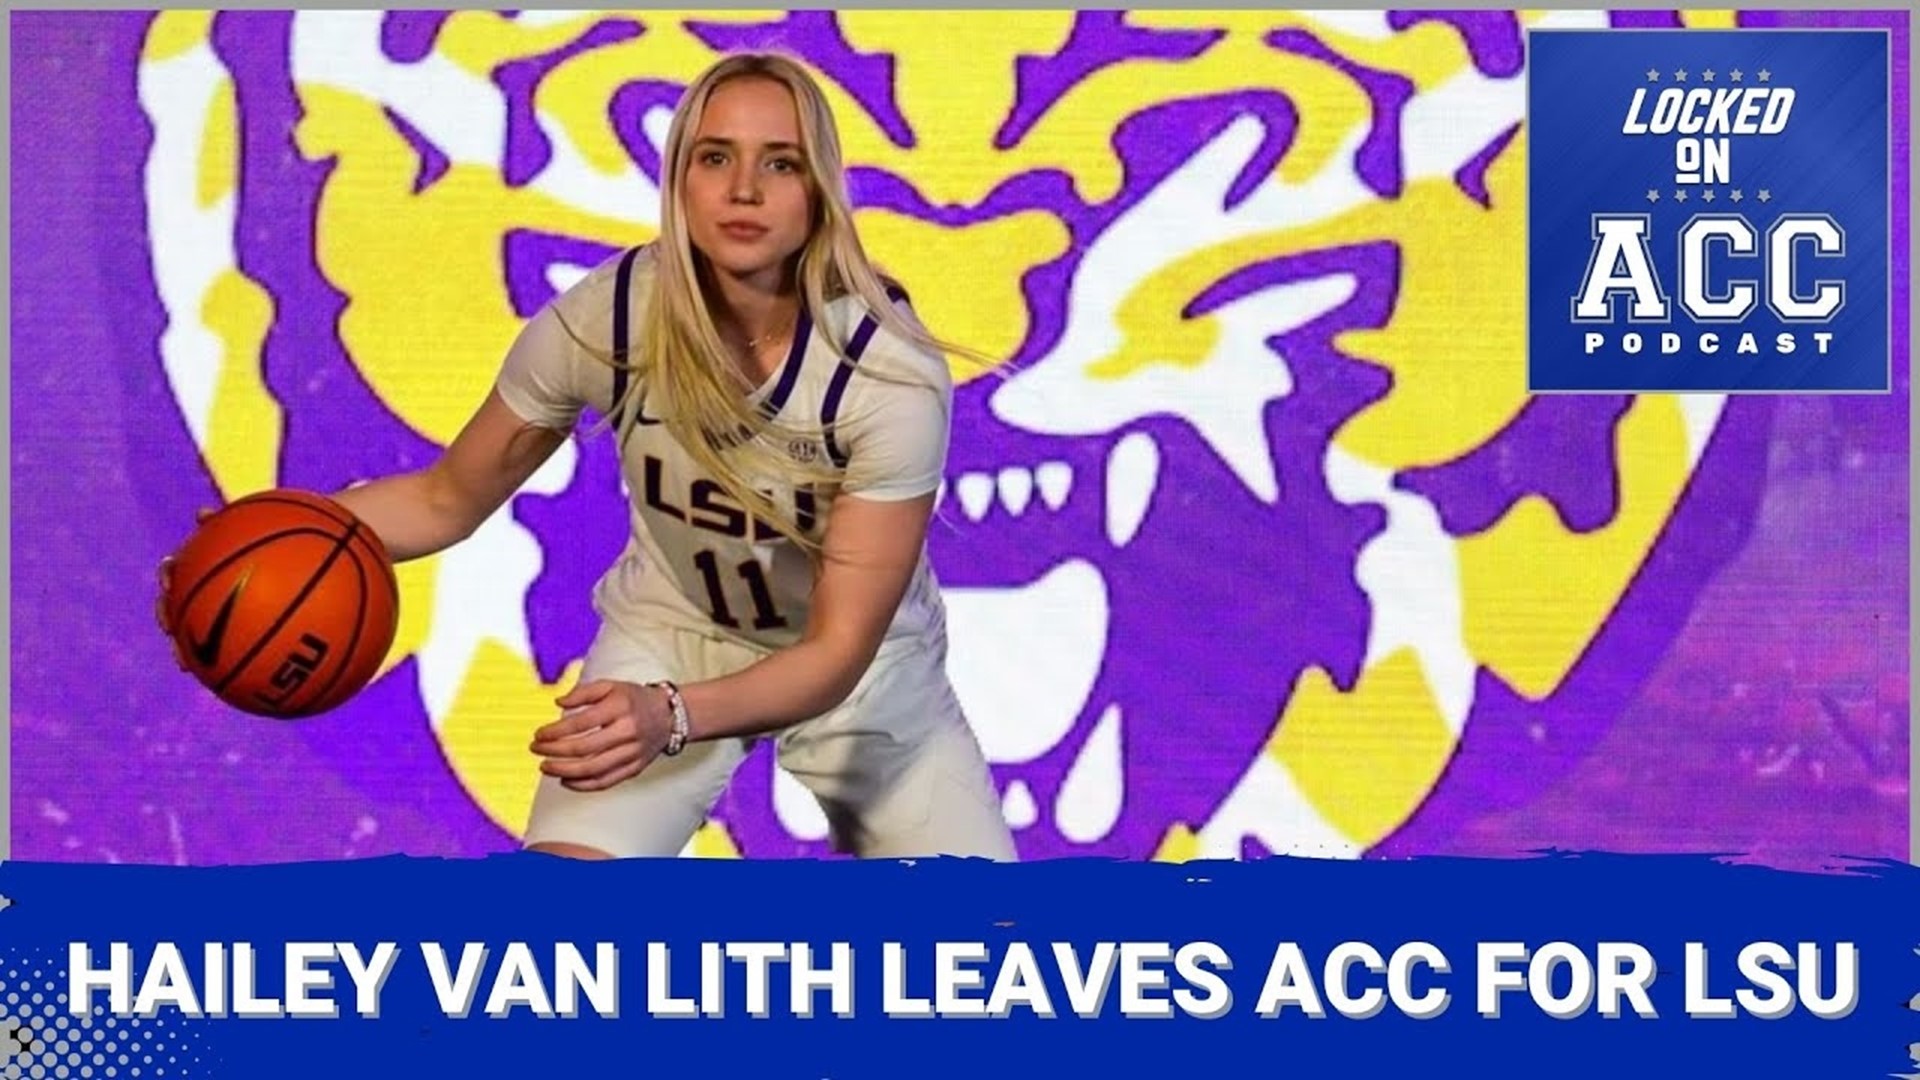 Hailey Van Lith leaves Louisville for LSU. What energy will she bring to the already fiery Tigers program. How will she complement Angel Reese.